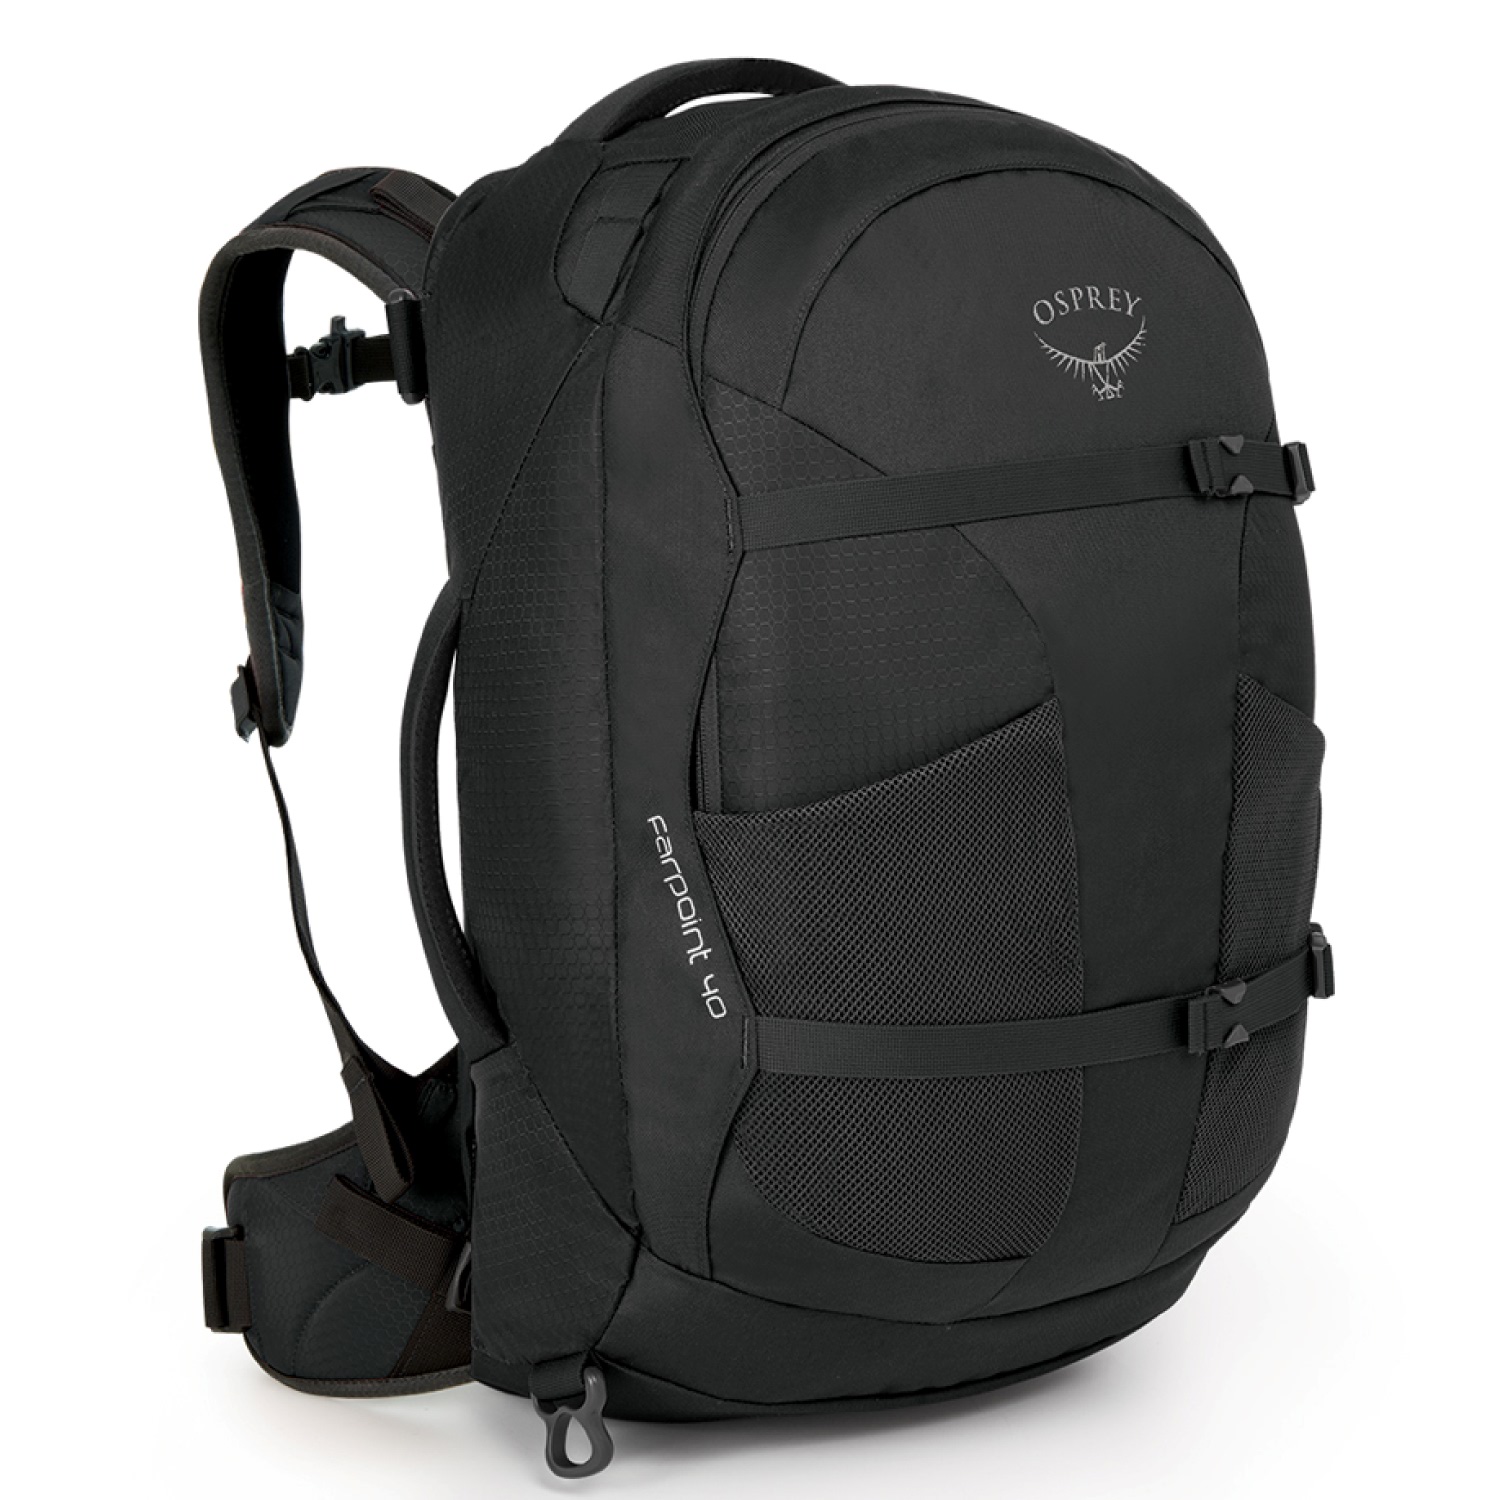 Buy Thule Notus Backpack 21L - Black in Singapore & Malaysia - The ...